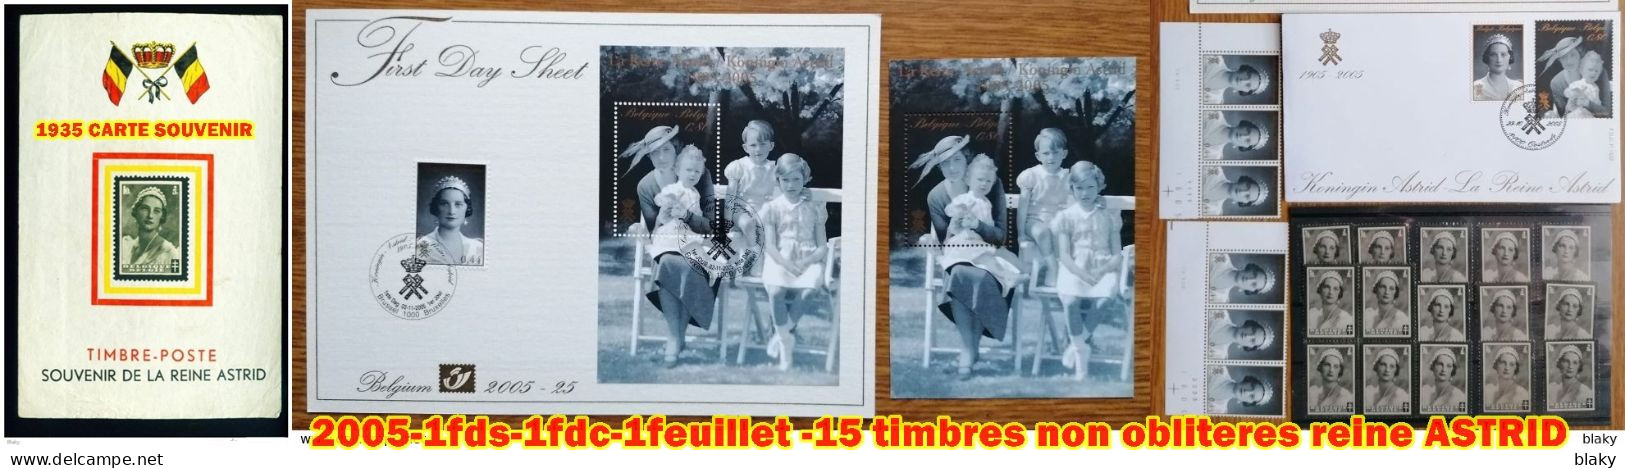 2005-1fds-1fdc-1feuillet -15 Timbres Non Obliteres Reine ASTRID+ 1 FEUILLET1935 - 1999-2010